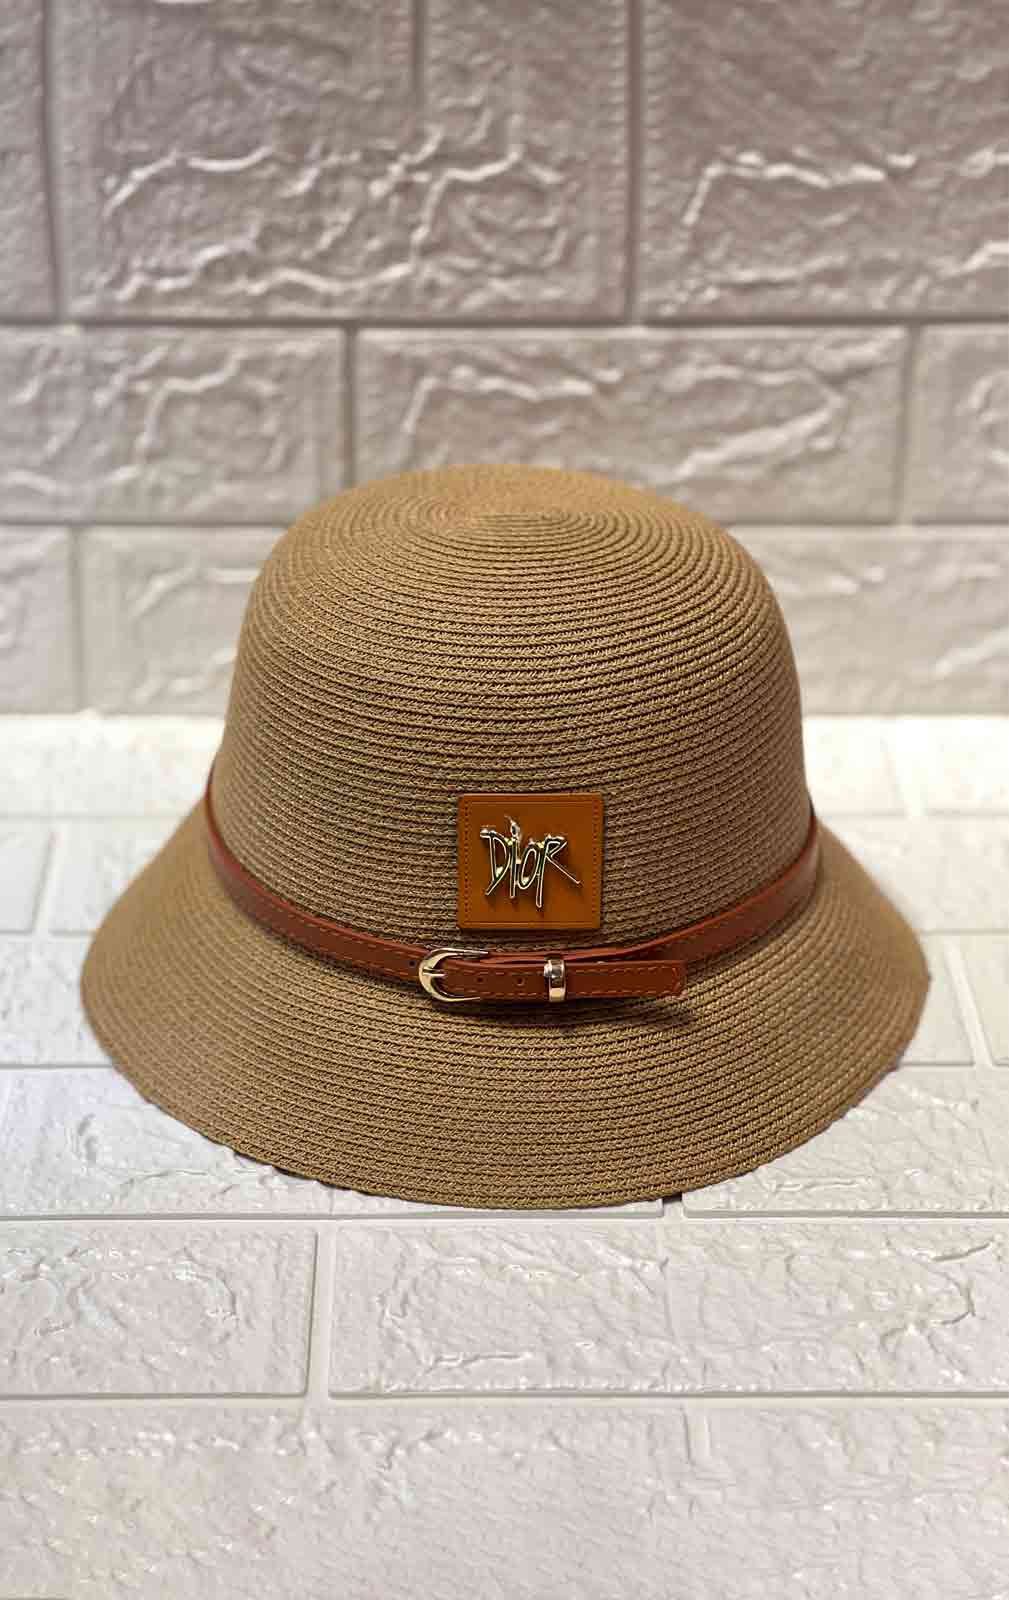 Dior Summer Hats For Woman-DD-HT